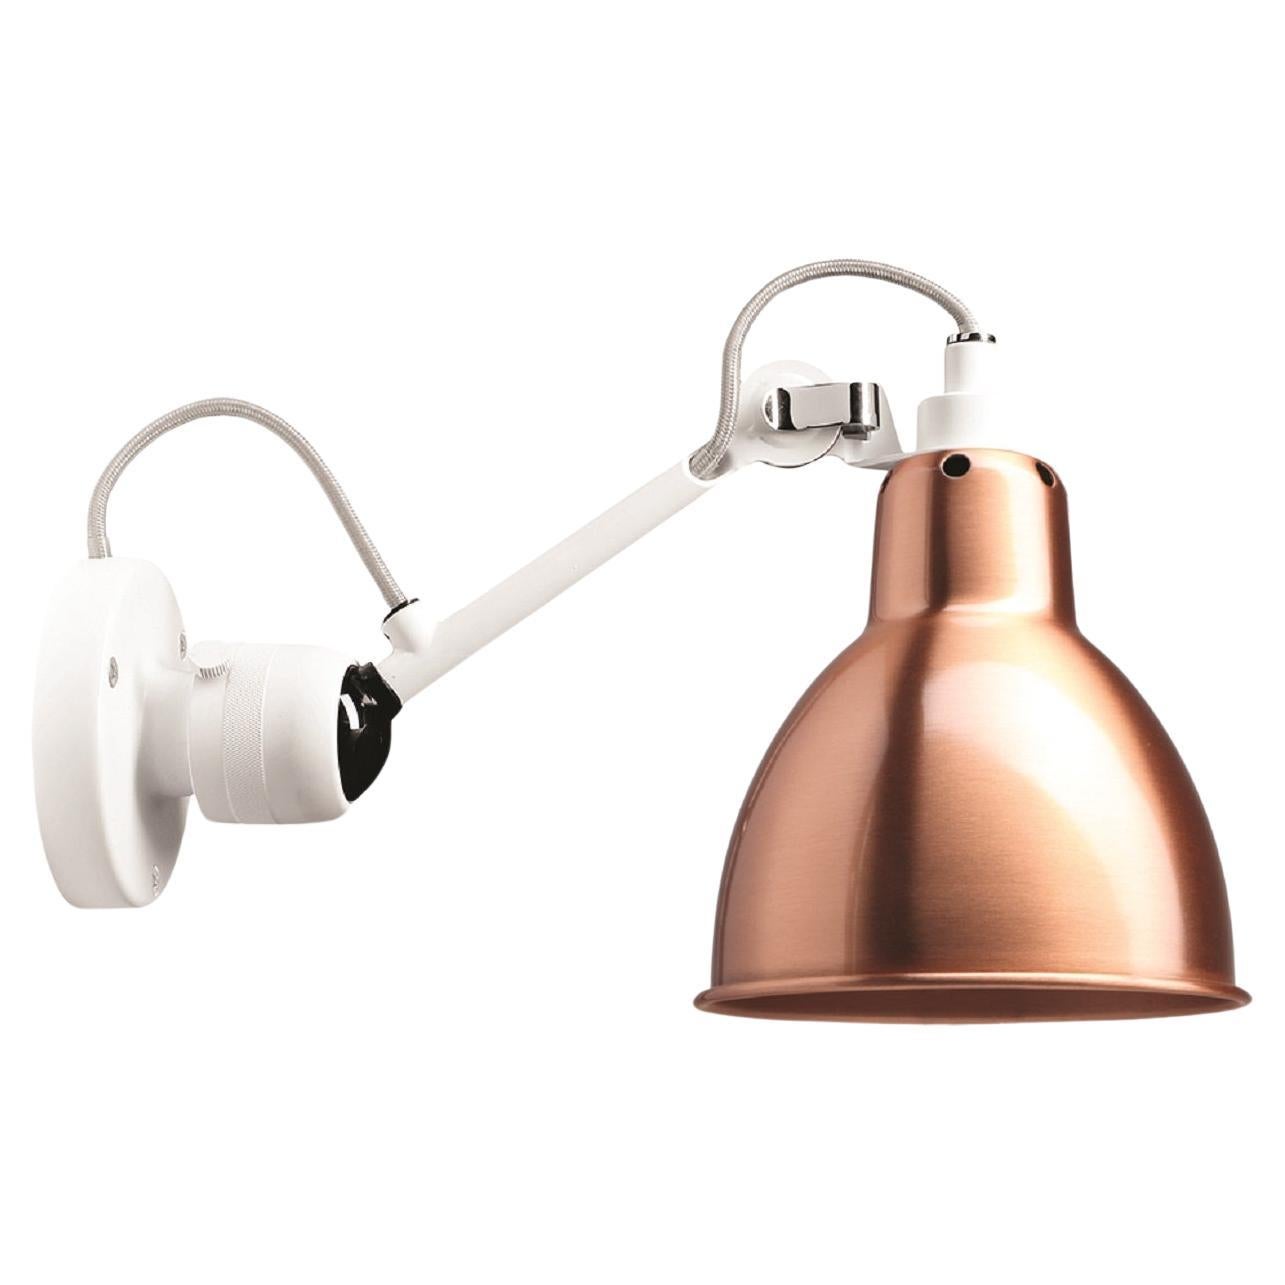 DCW Editions La Lampe Gras N°304 Wall Lamp in White Arm and Copper Shade